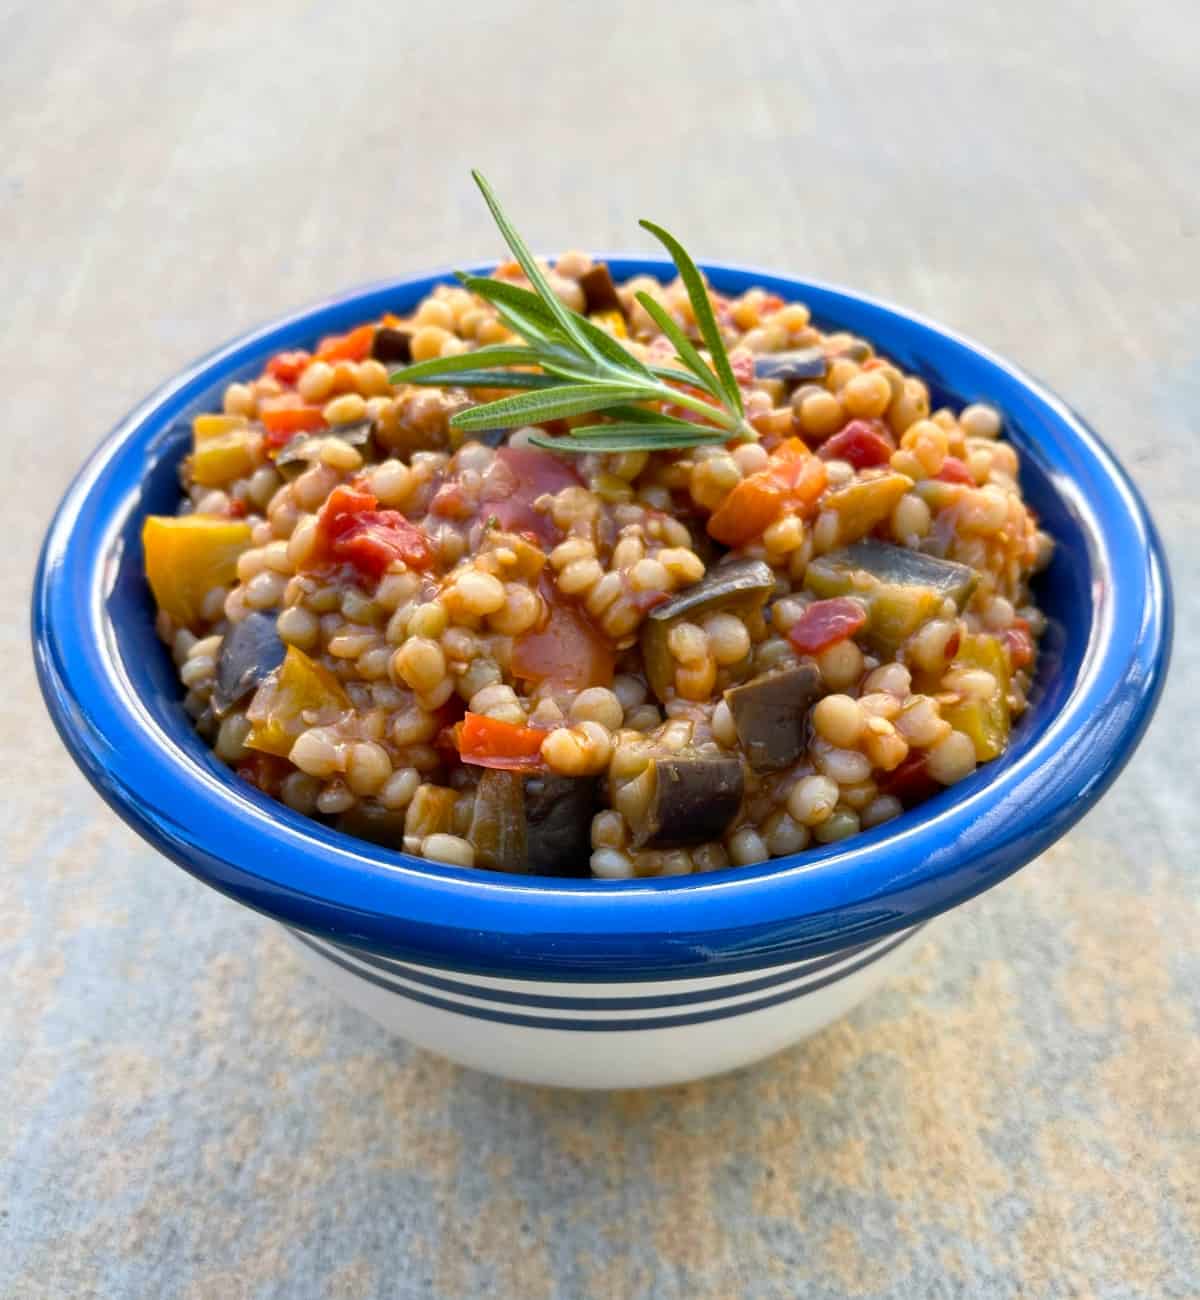 Pearl couscous with peppers and eggplant in blue and white serving bowl.